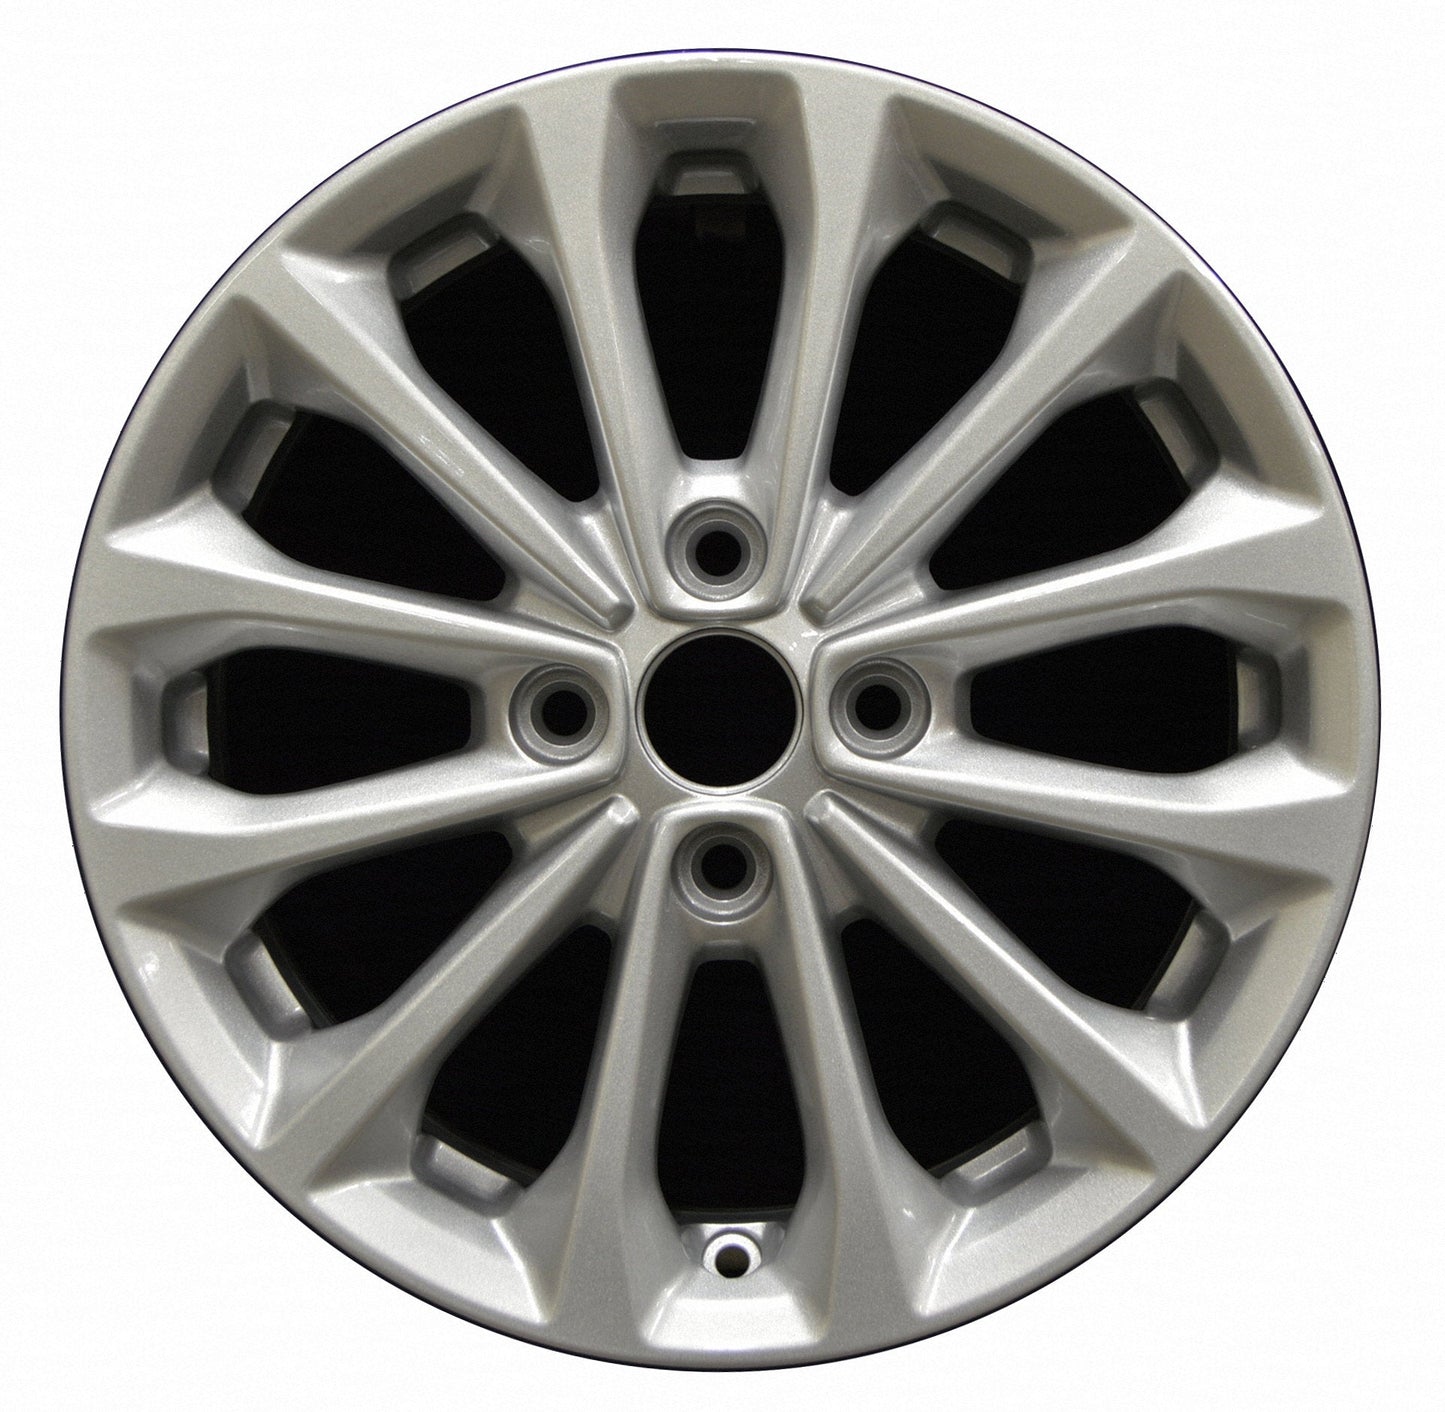 Ford Fiesta  2014, 2015, 2016, 2017, 2018 Factory OEM Car Wheel Size 16x6.5 Alloy WAO.3966.PS14.FF